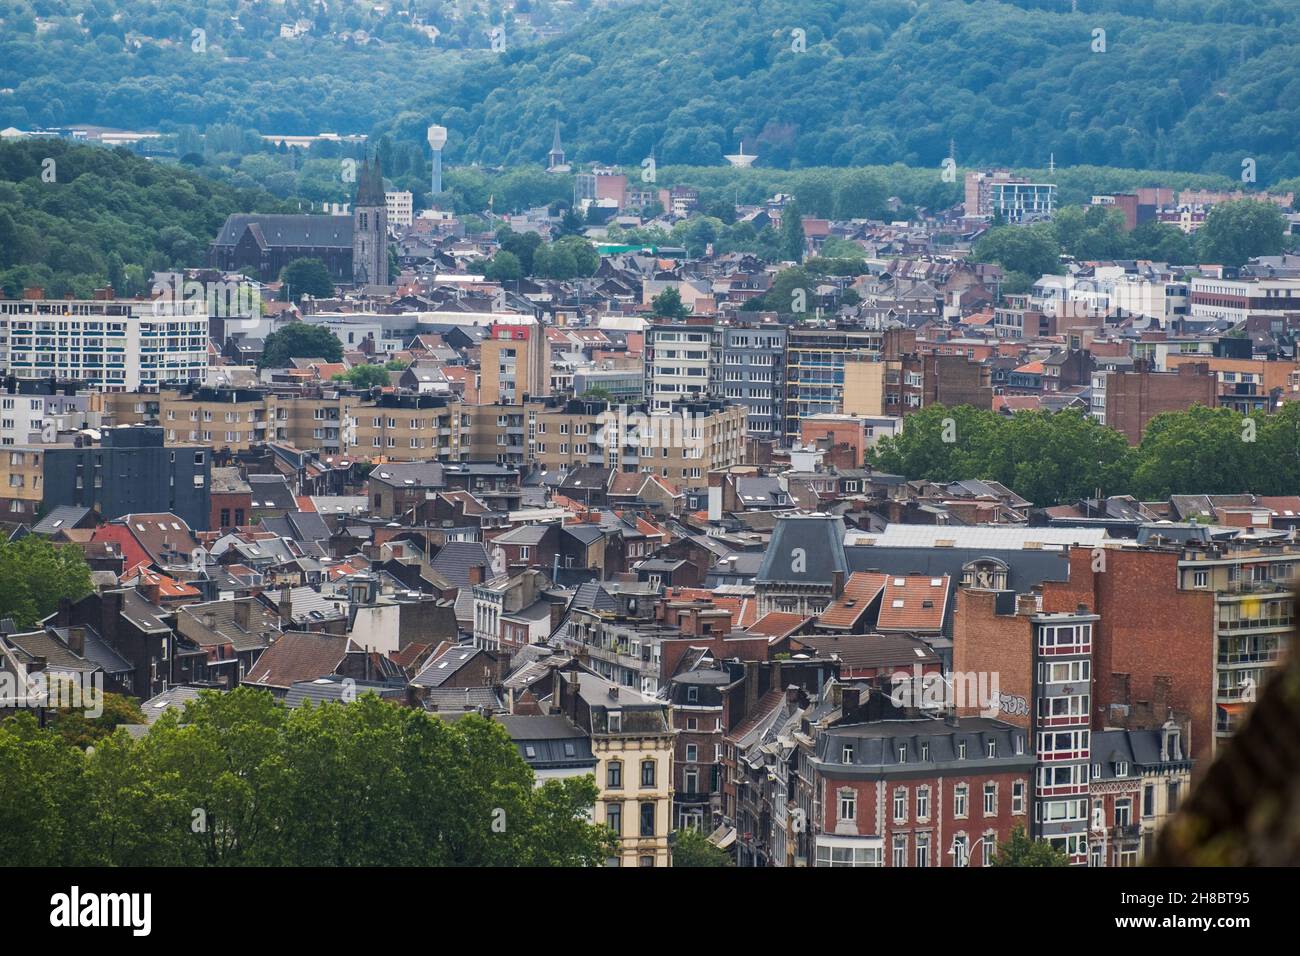 The city of Liège as seen from the viewpoint on 'Montagne de Bueren' in Liège. Stock Photo